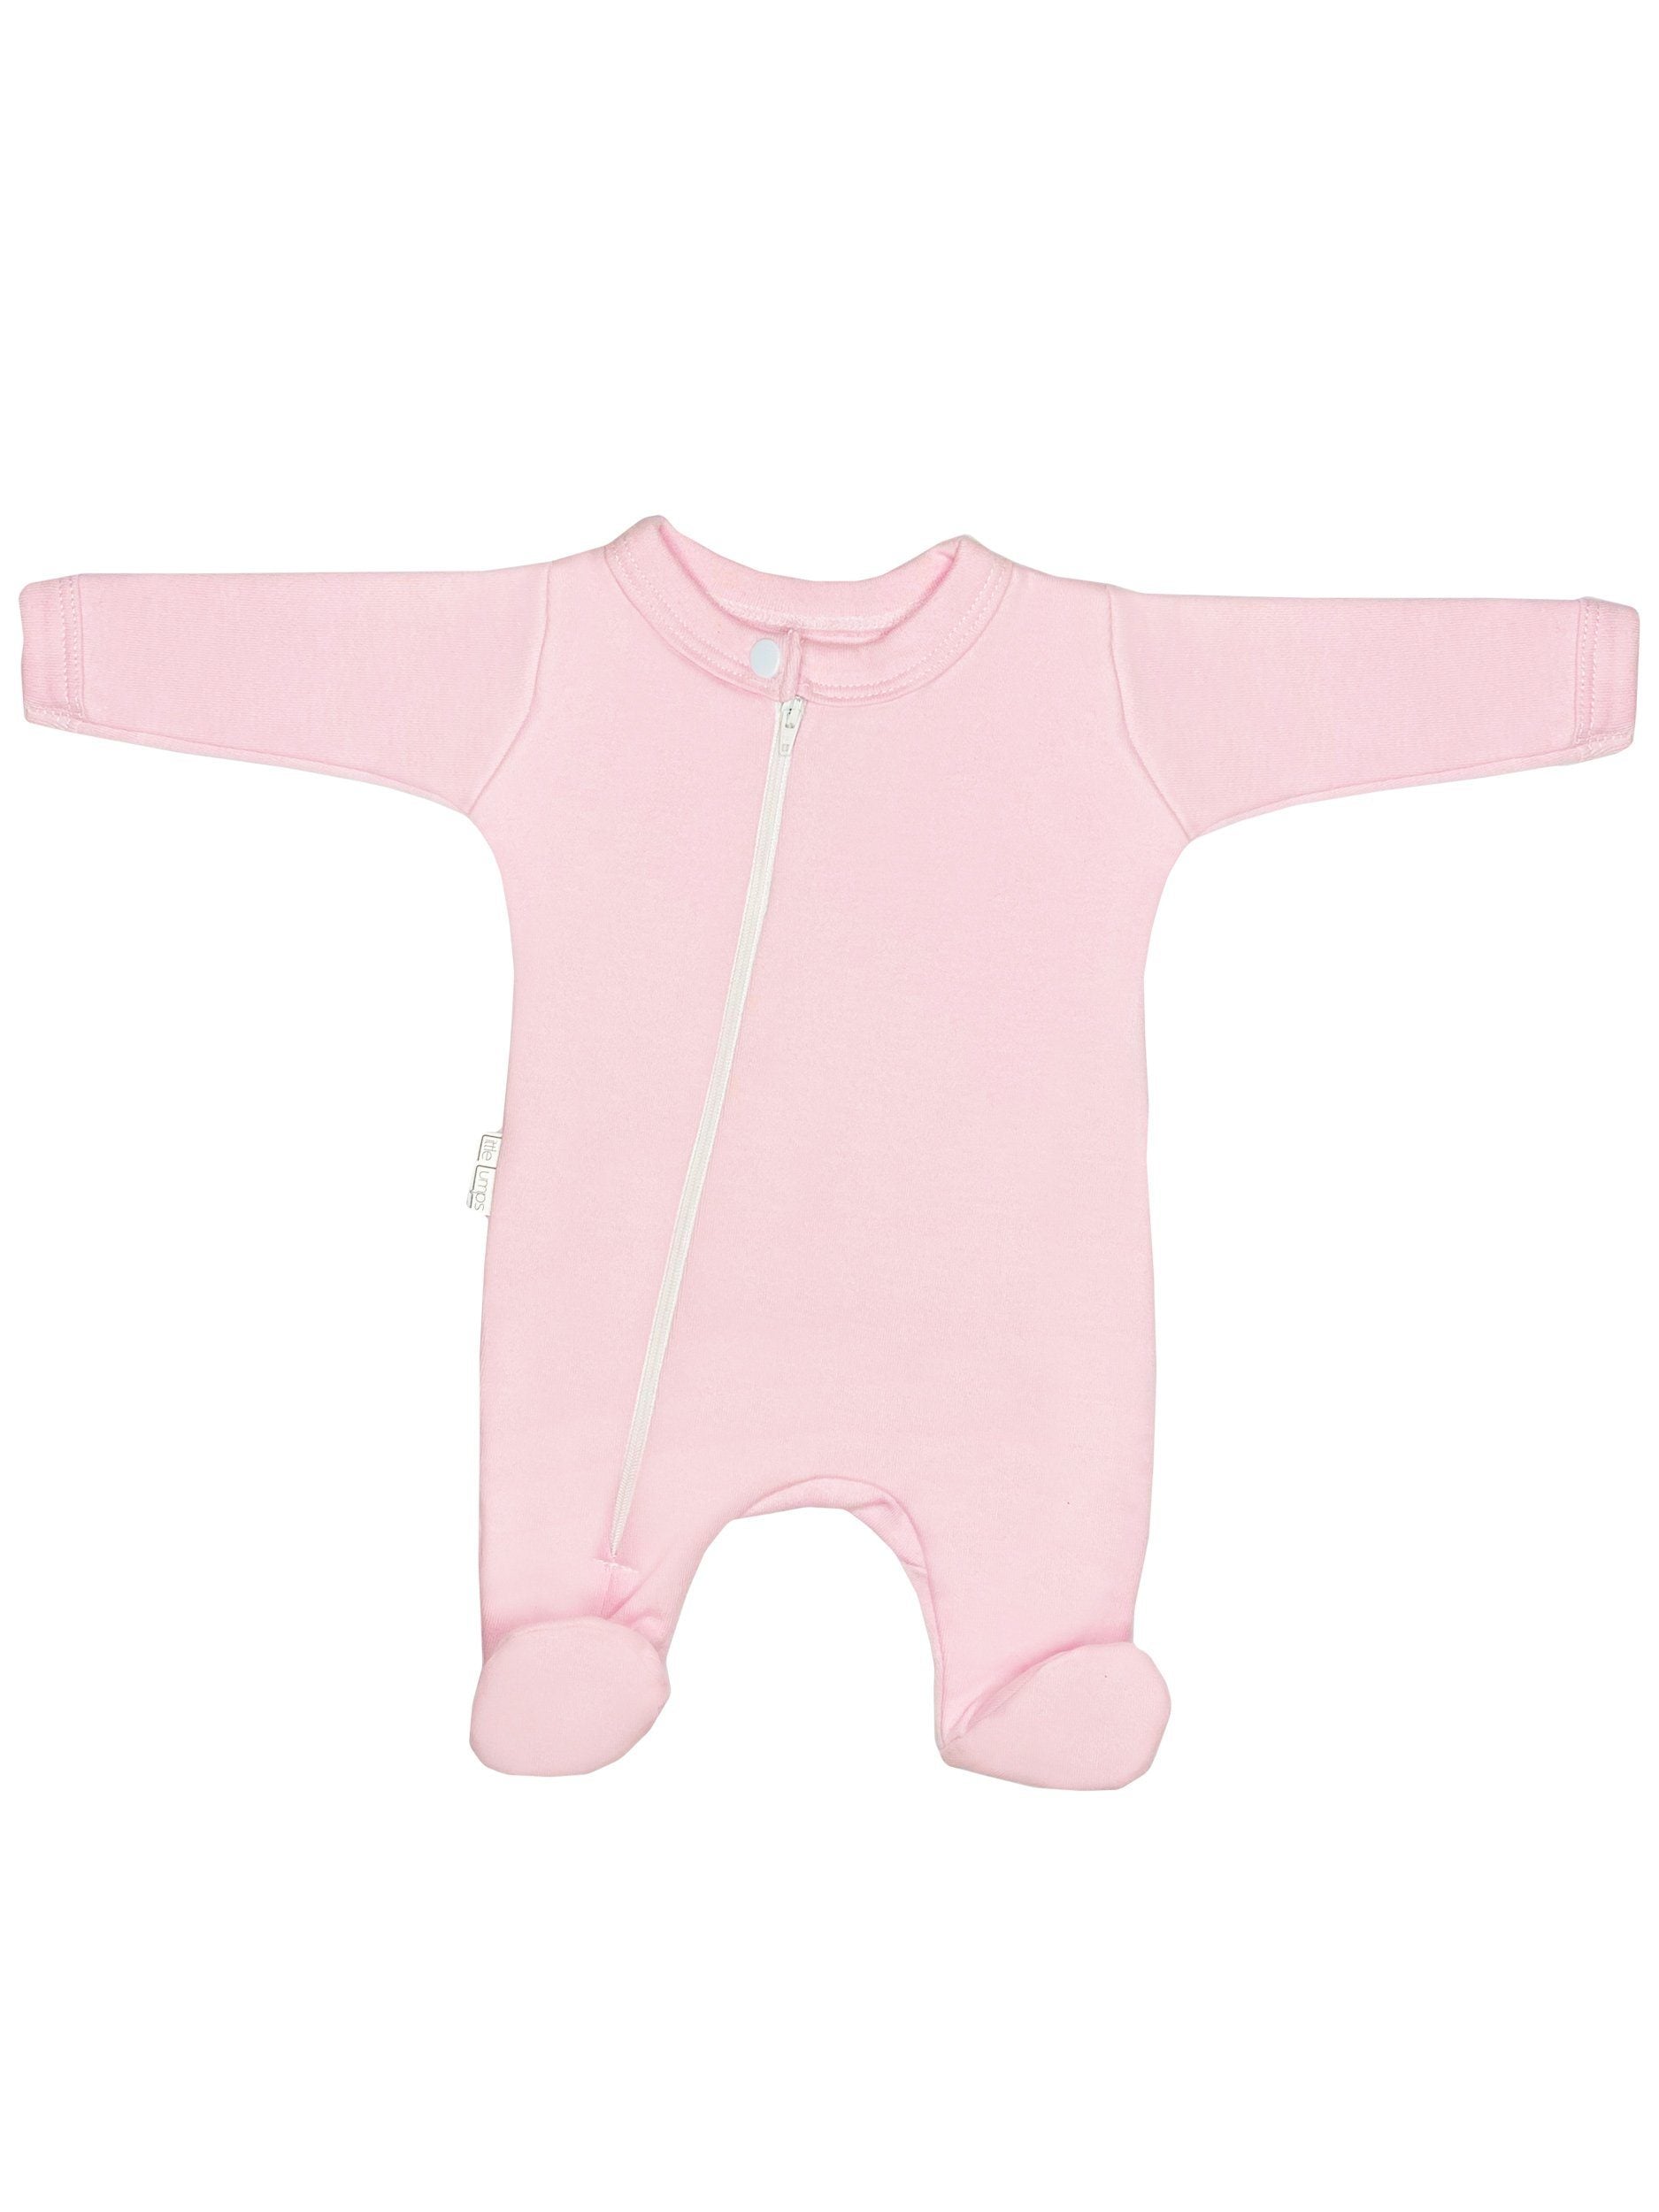 Zip Up Sleepsuit For Premature Baby, Footed - Pink - Sleepsuit / Babygrow - Little Lumps